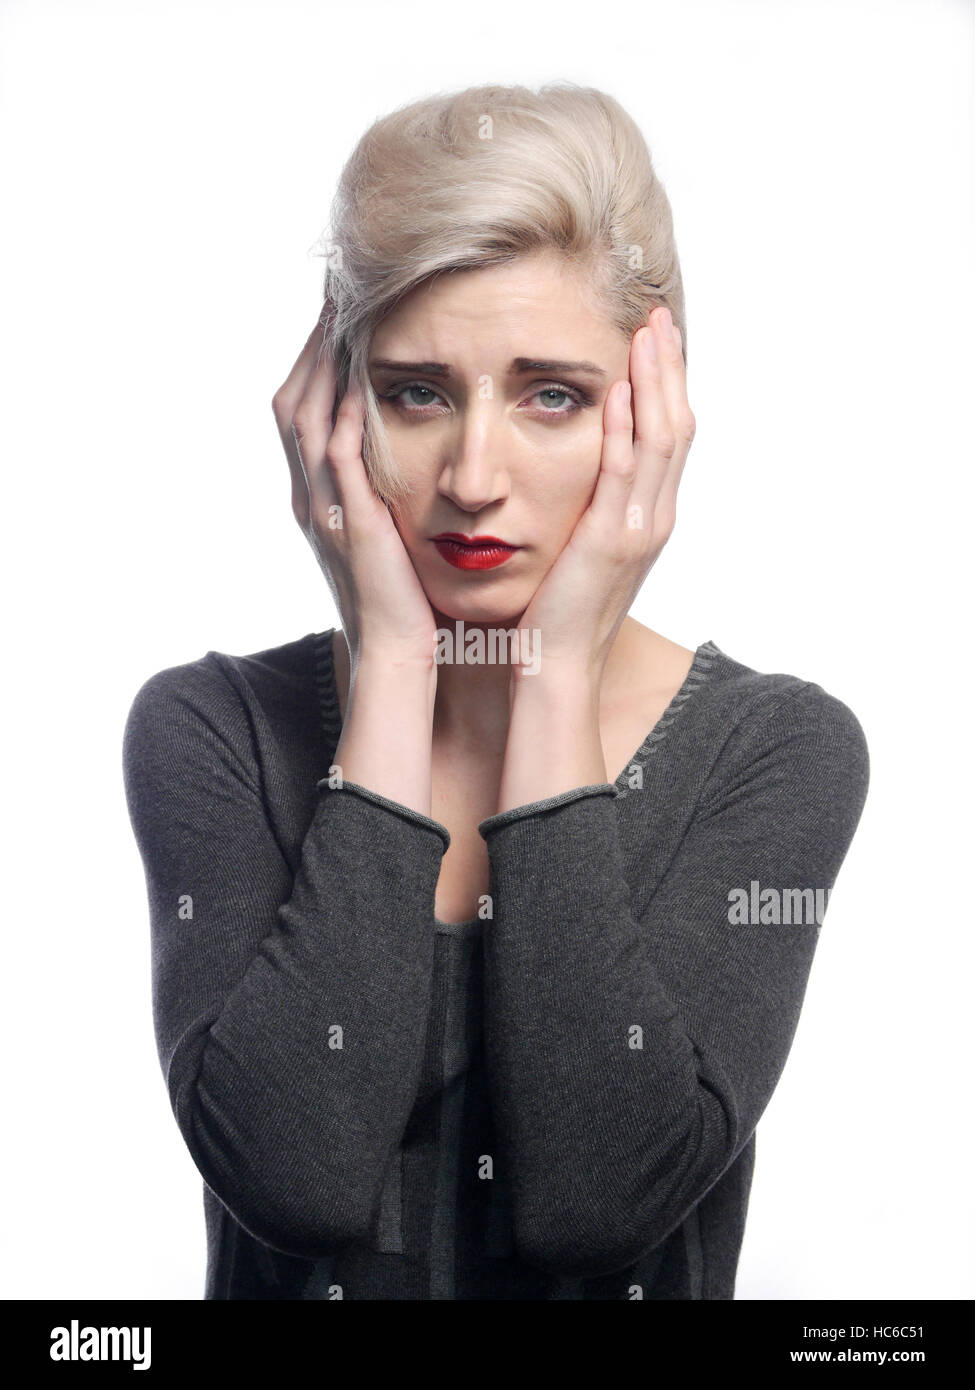 A image of a worried woman holding her hands up to her face. Stock Photo